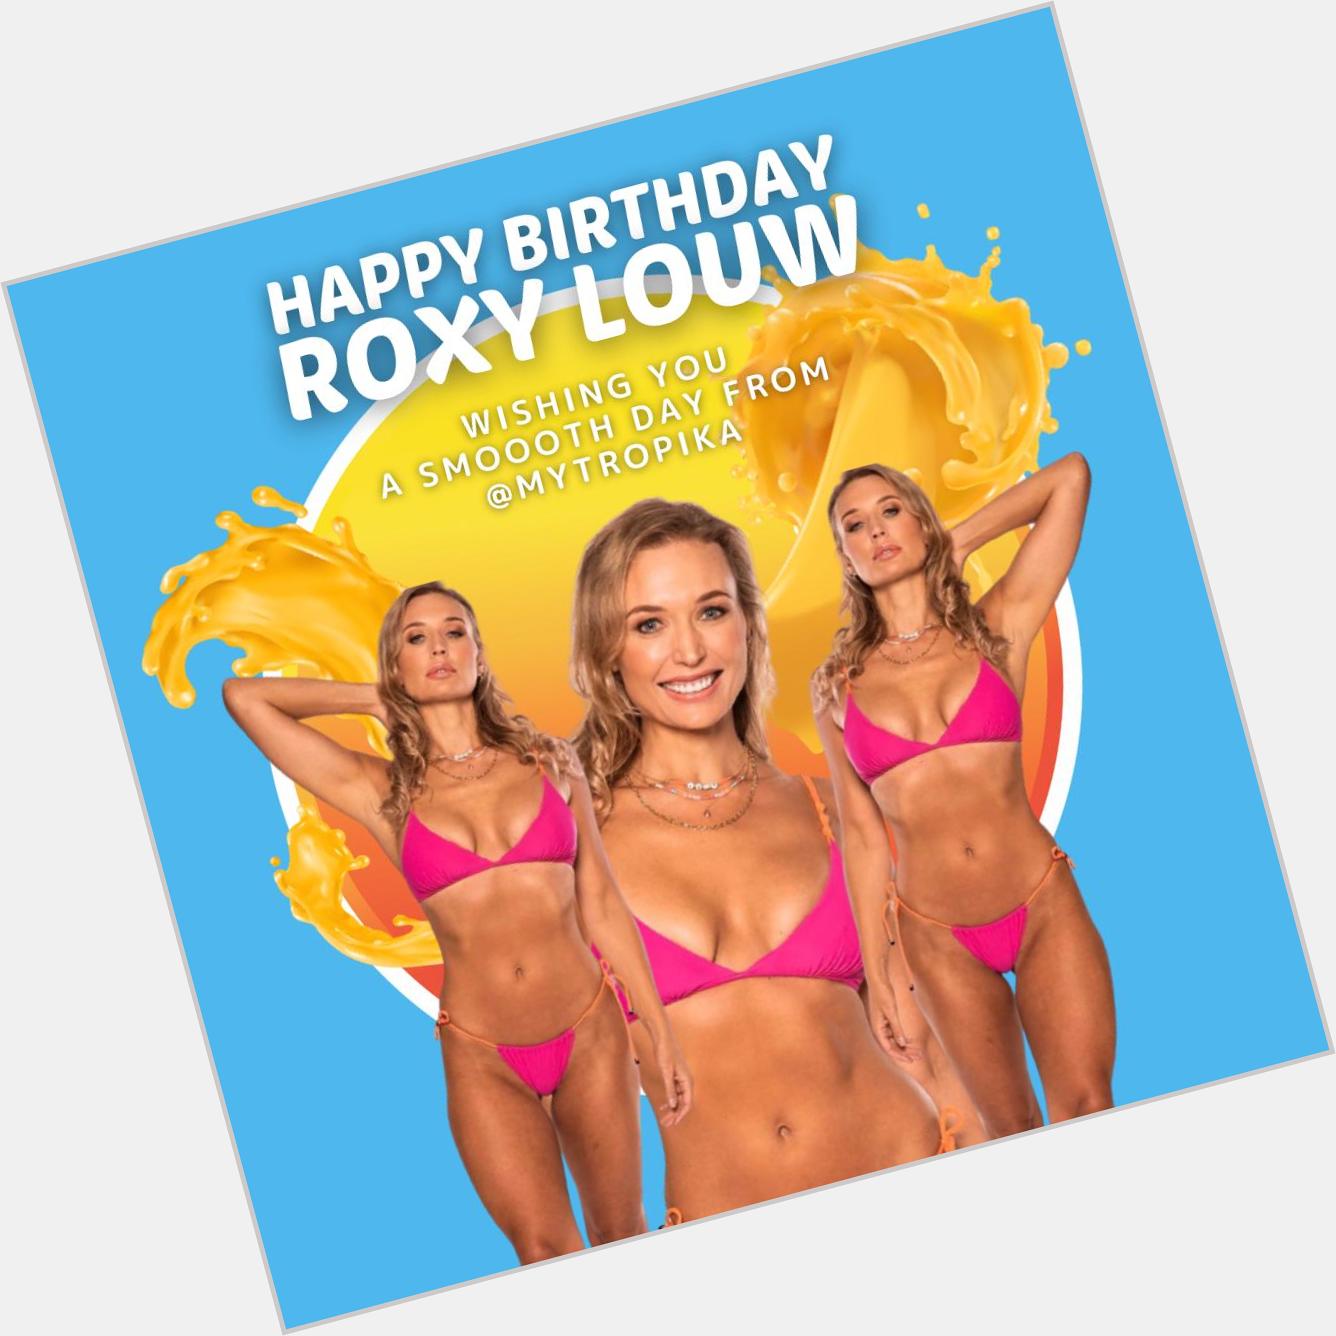 Happy Birthday to our smoooth surfer babe Roxy Louw!  